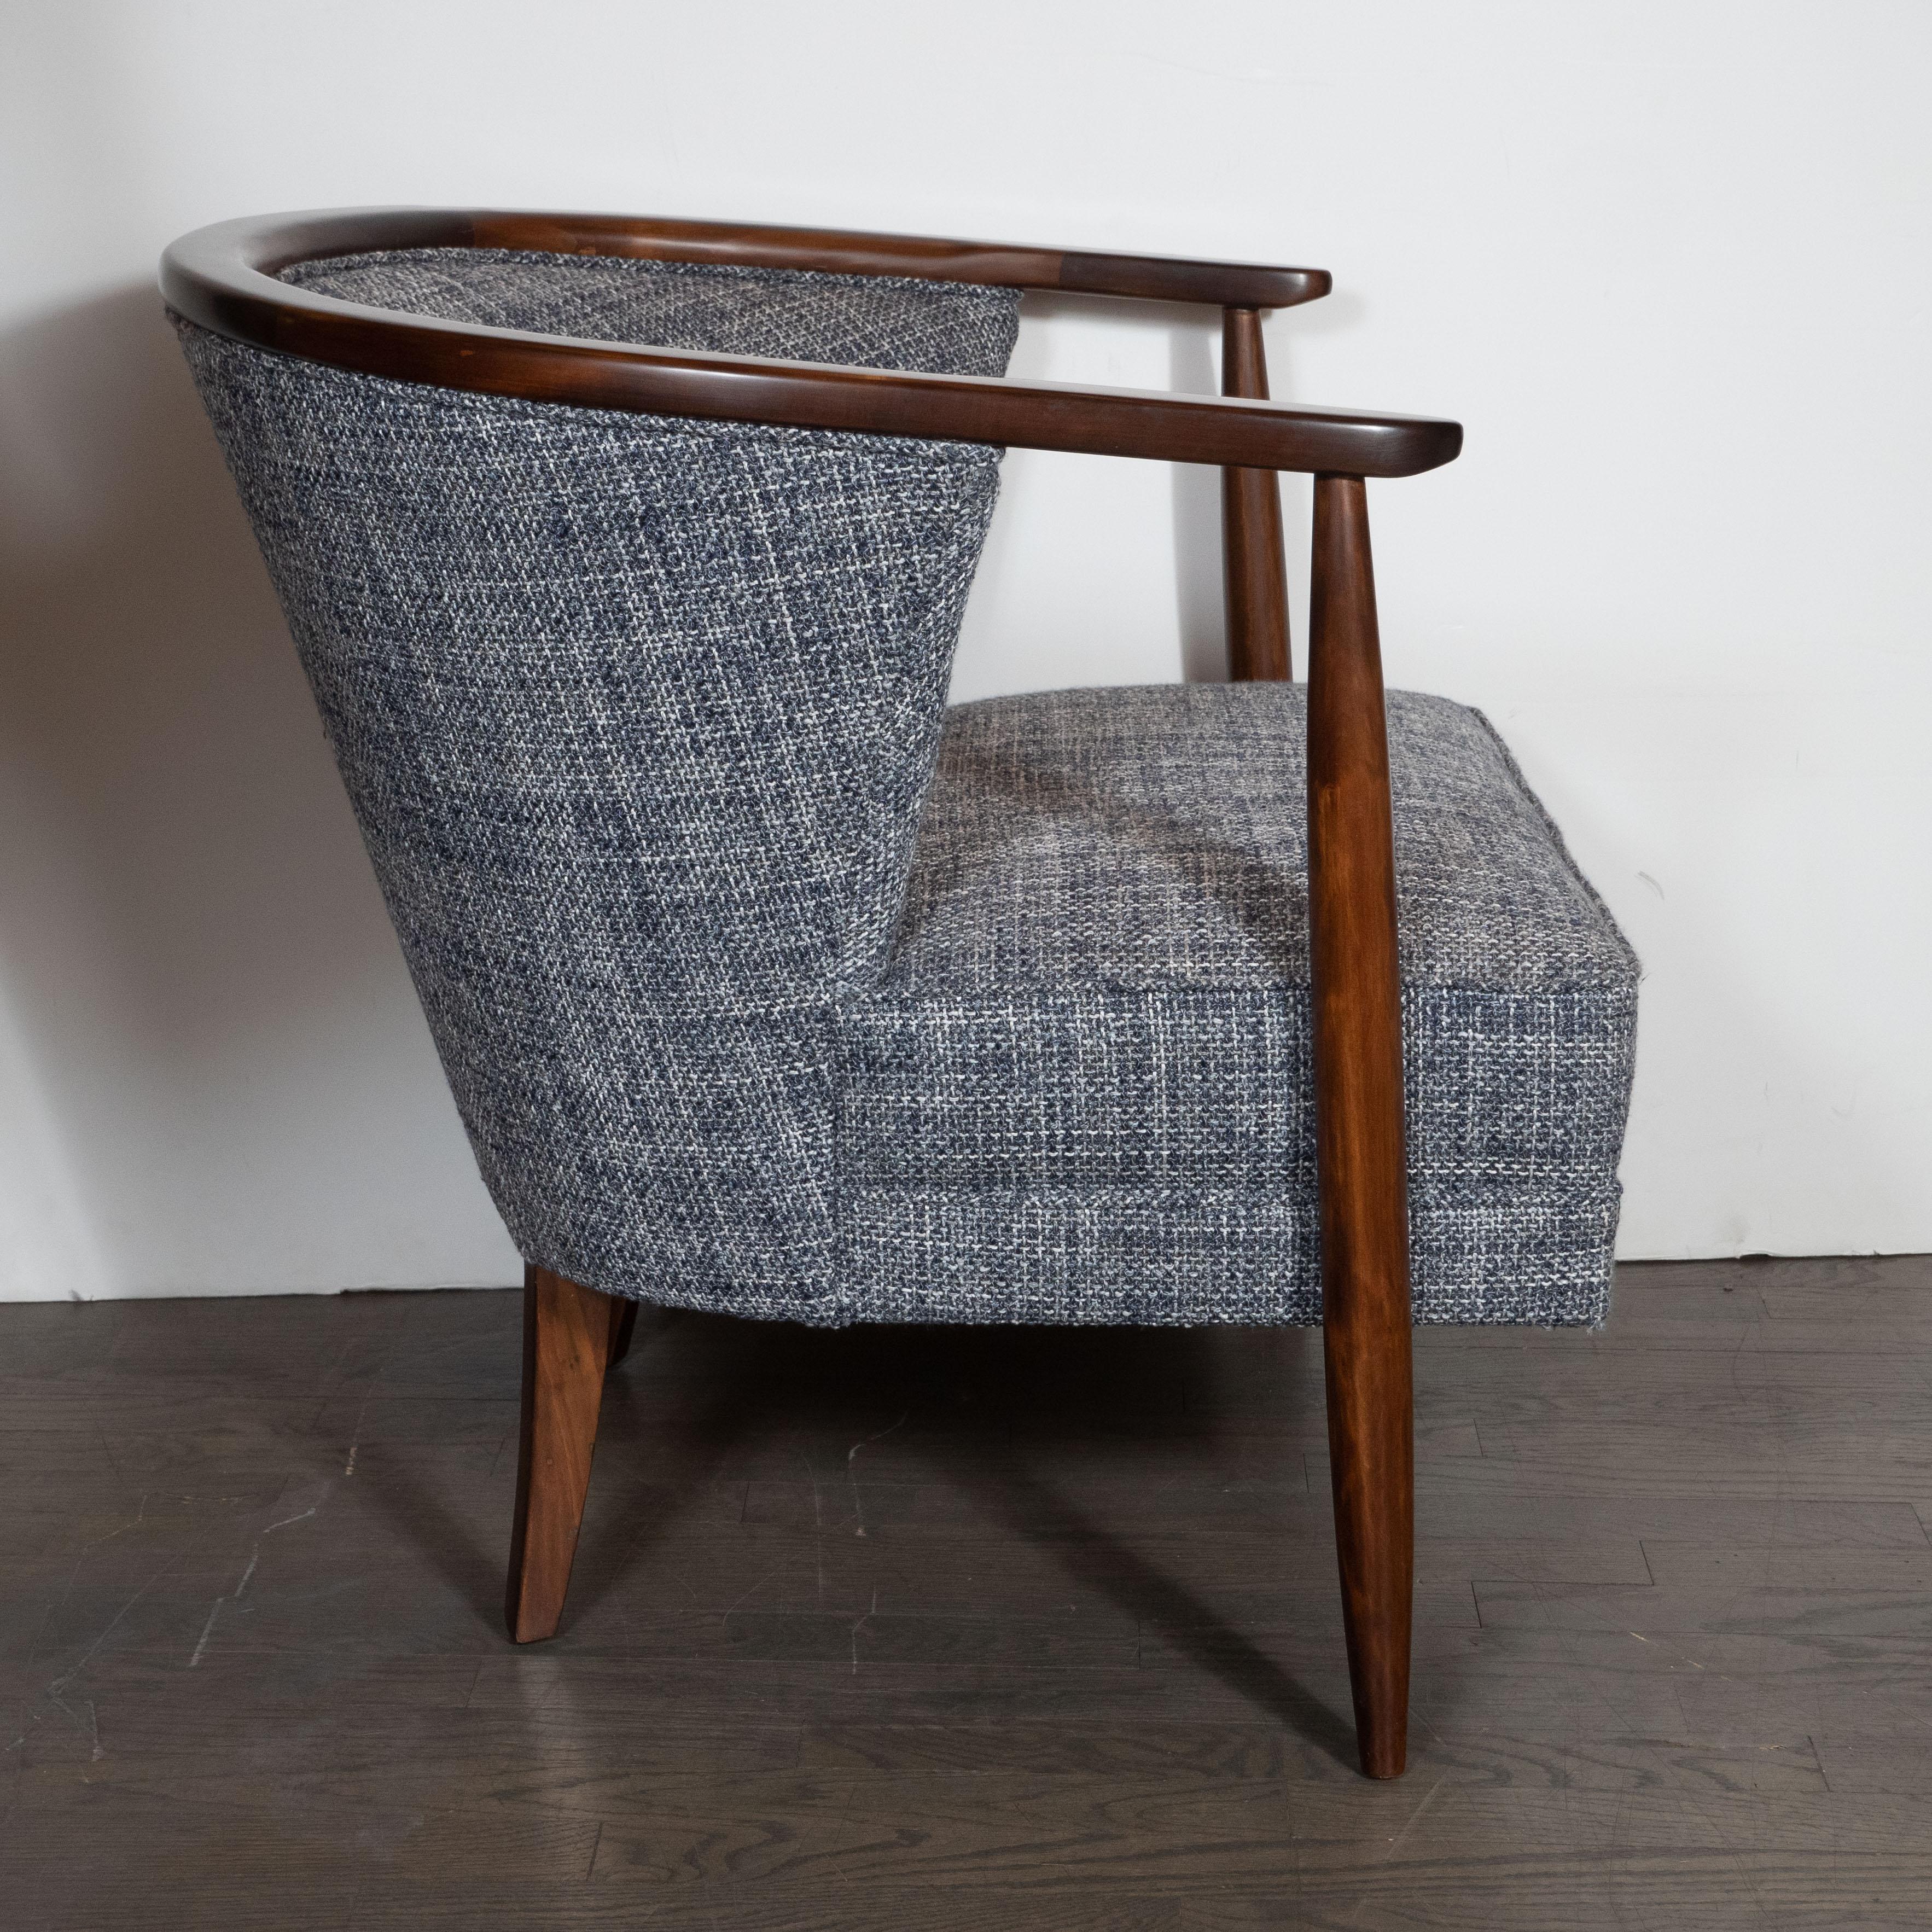 American Midcentury Barrel Back Chairs in Handrubbed Walnut with Rectilinear Upholstery